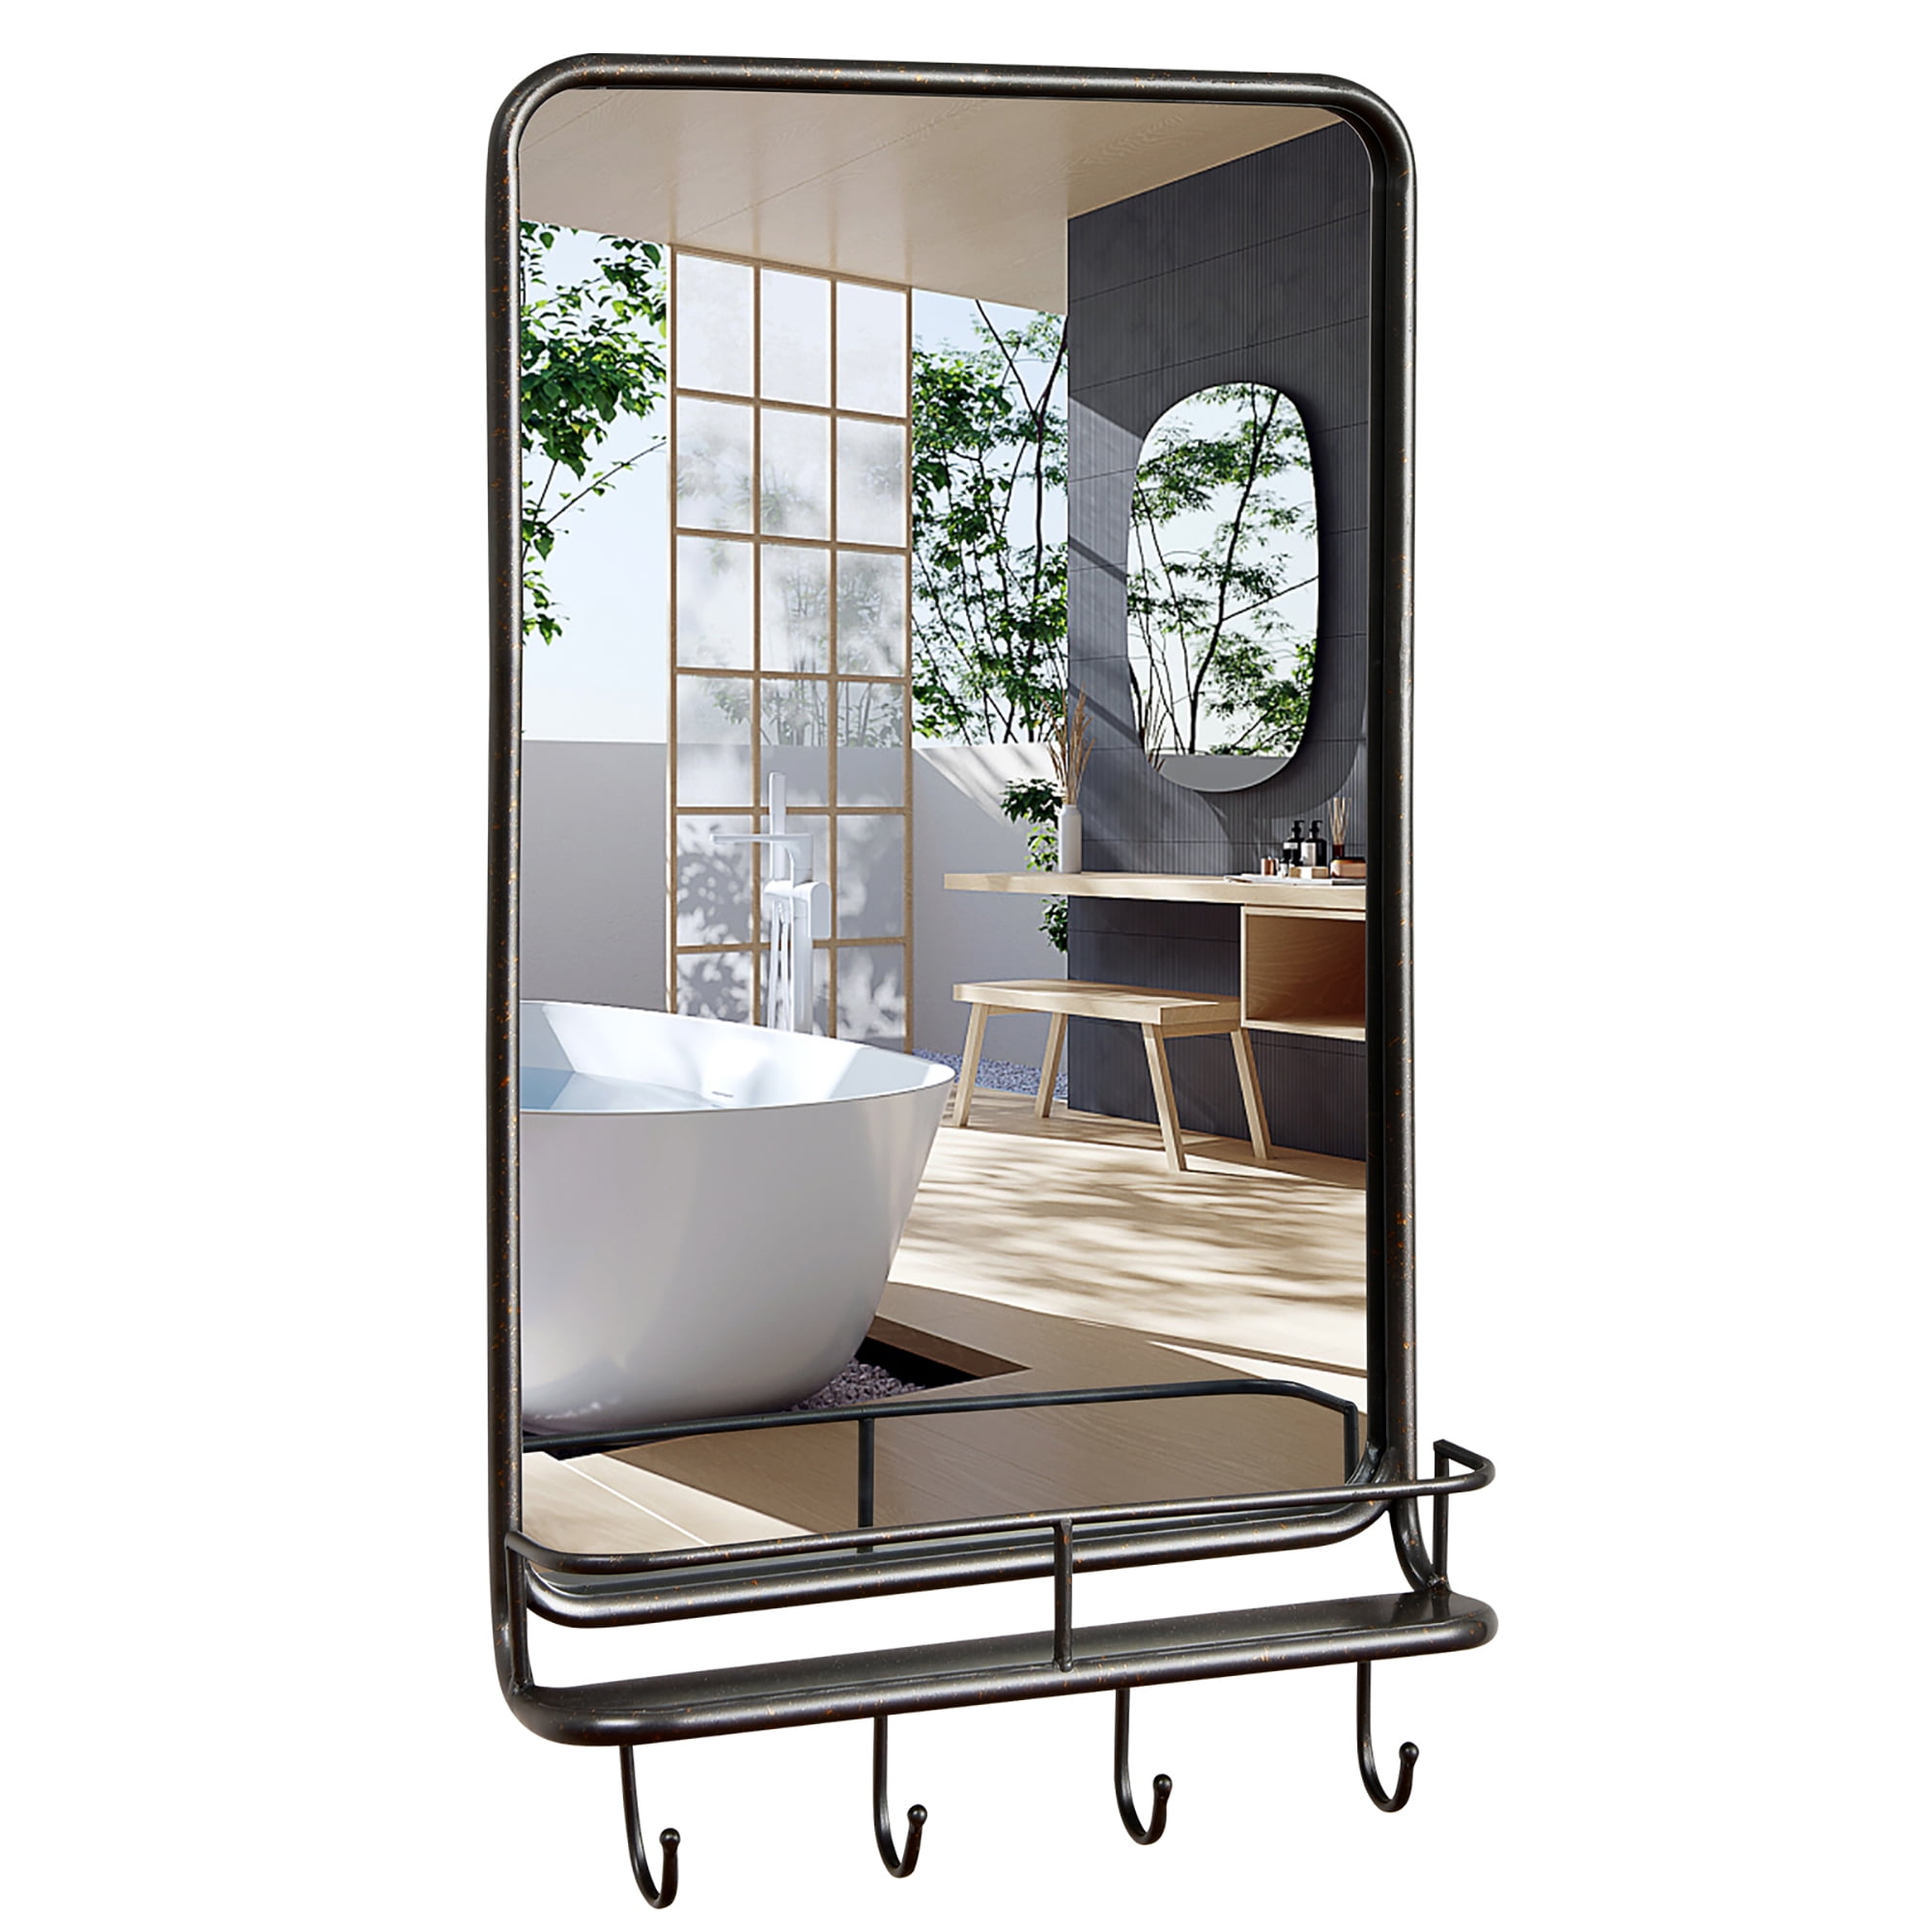 Bathroom Mirror with Shelf, Sticky Hook Suction Installation, Plastic  Waterproof Durable HD Contemporary Simple Decorative Design,White